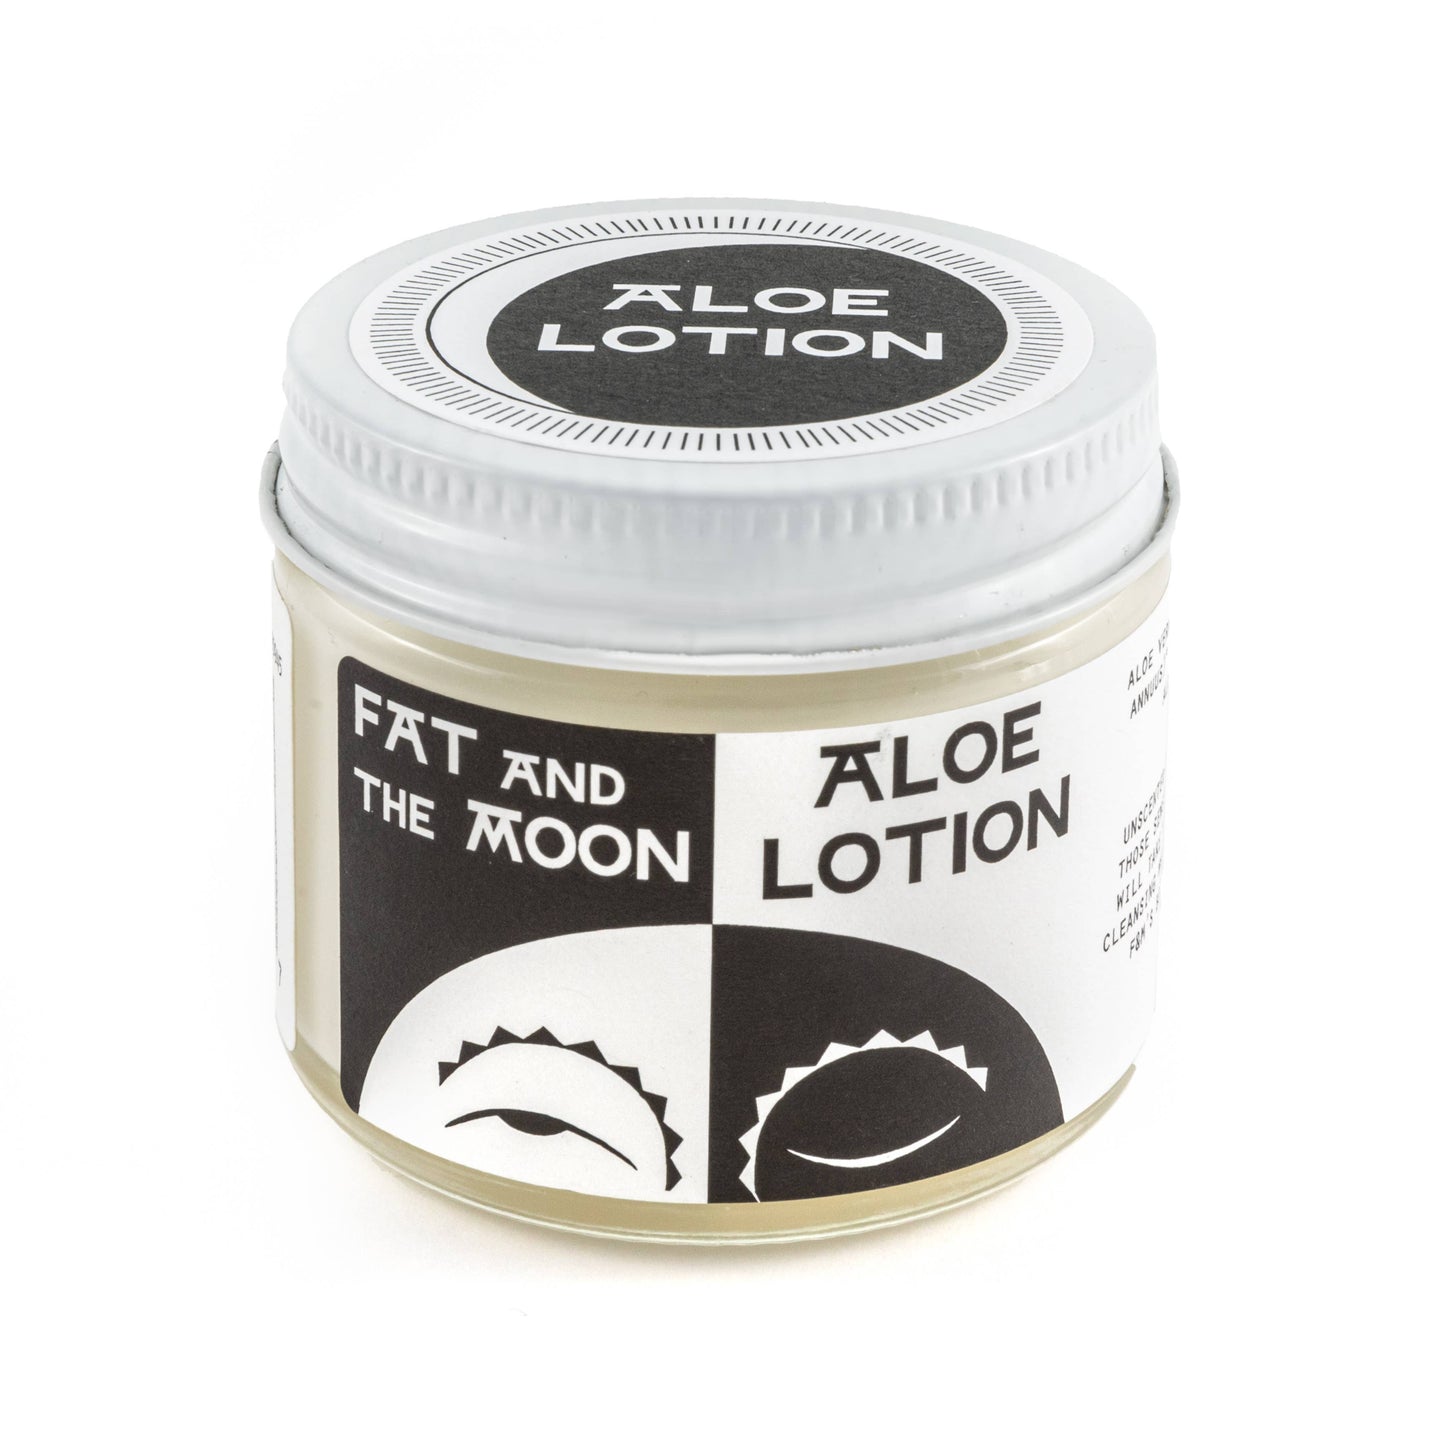 ONLINE ONLY - 
Fat & the Moon Aloe Lotion